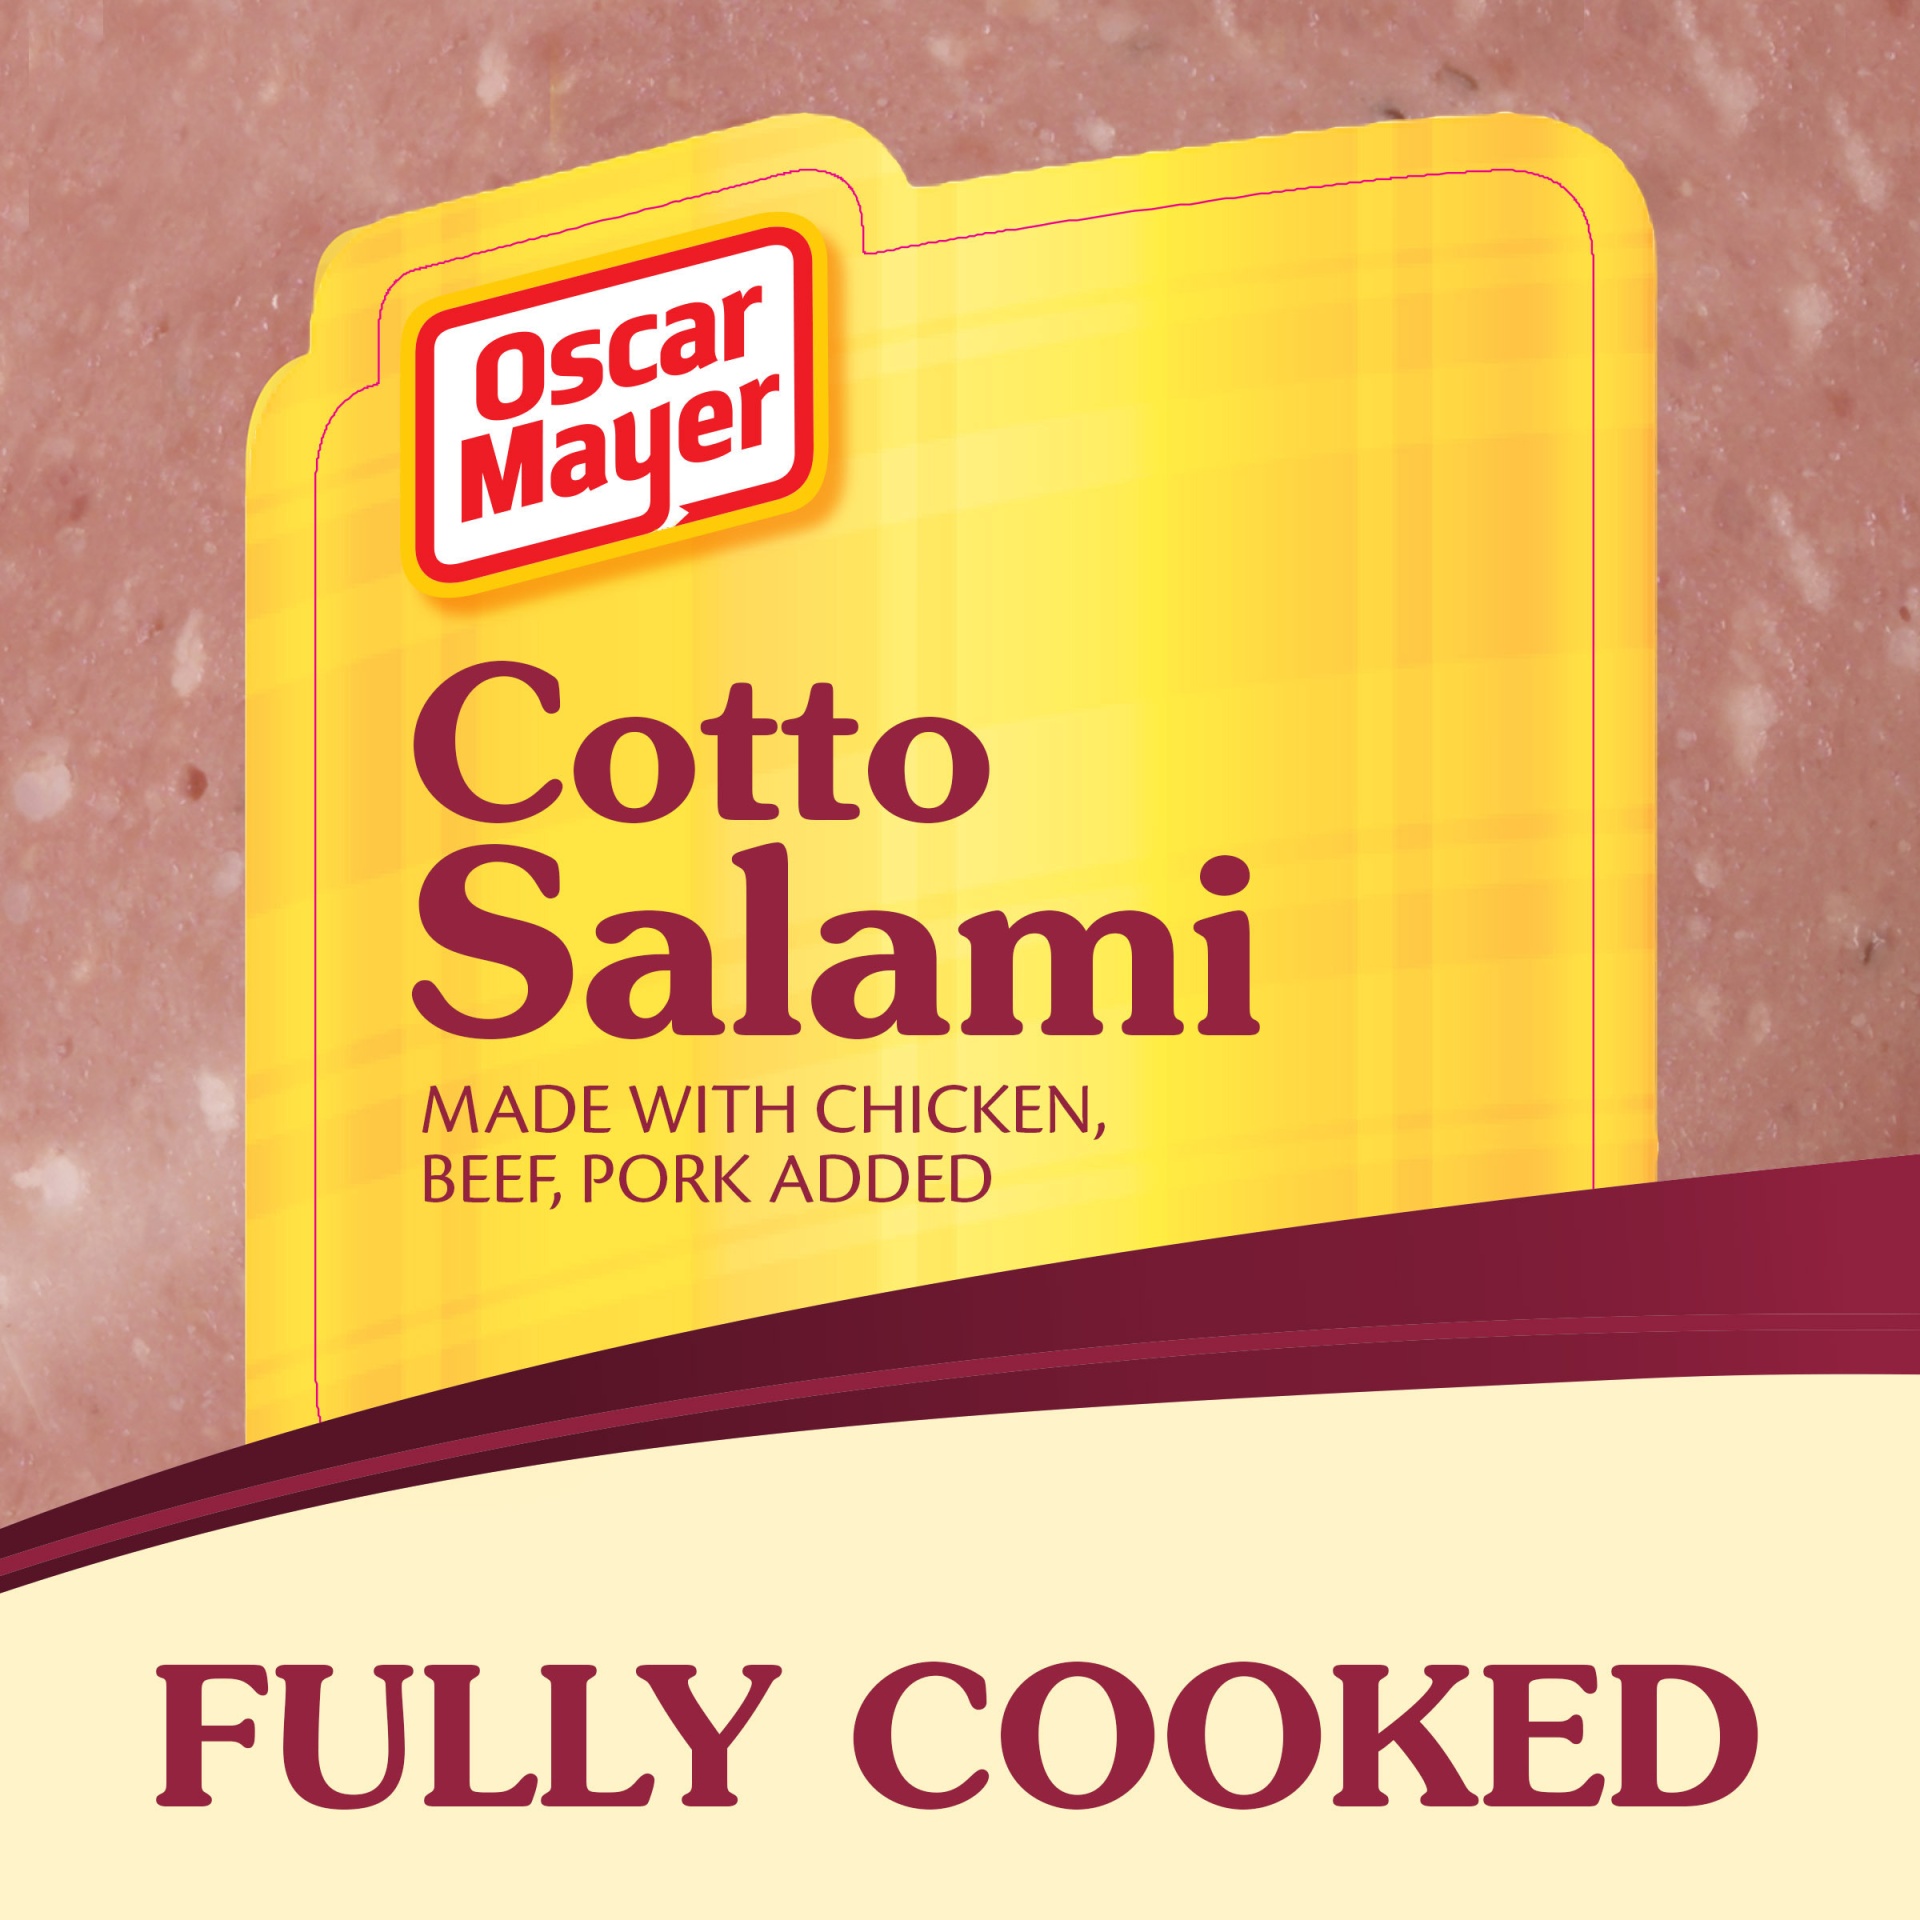 slide 2 of 5, Oscar Mayer Cotto Salami Made with Chicken And Beef, Pork Added Sliced Lunch Meat Pack, 16 oz